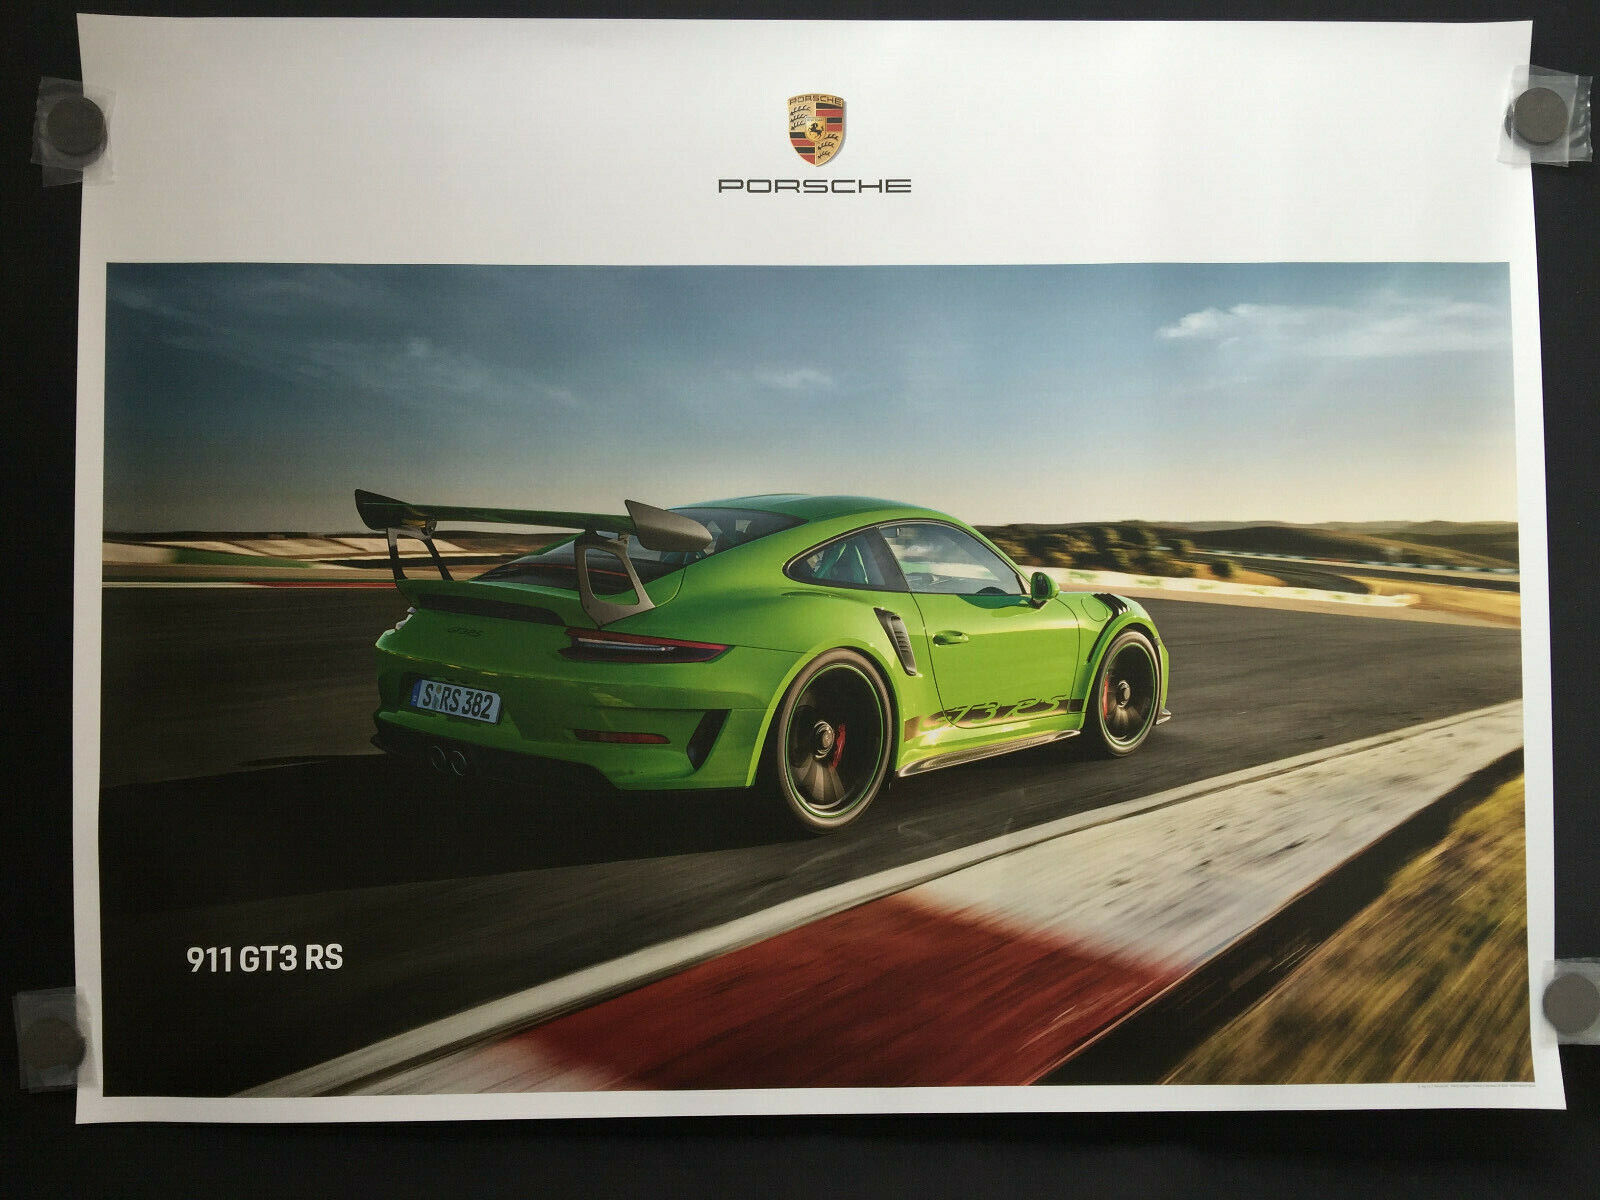 PORSCHE OFFICIAL 911 GT3 RS REAR 3/4 VIEW AT RACETRACK SHOWROOM POSTER 2018-2019